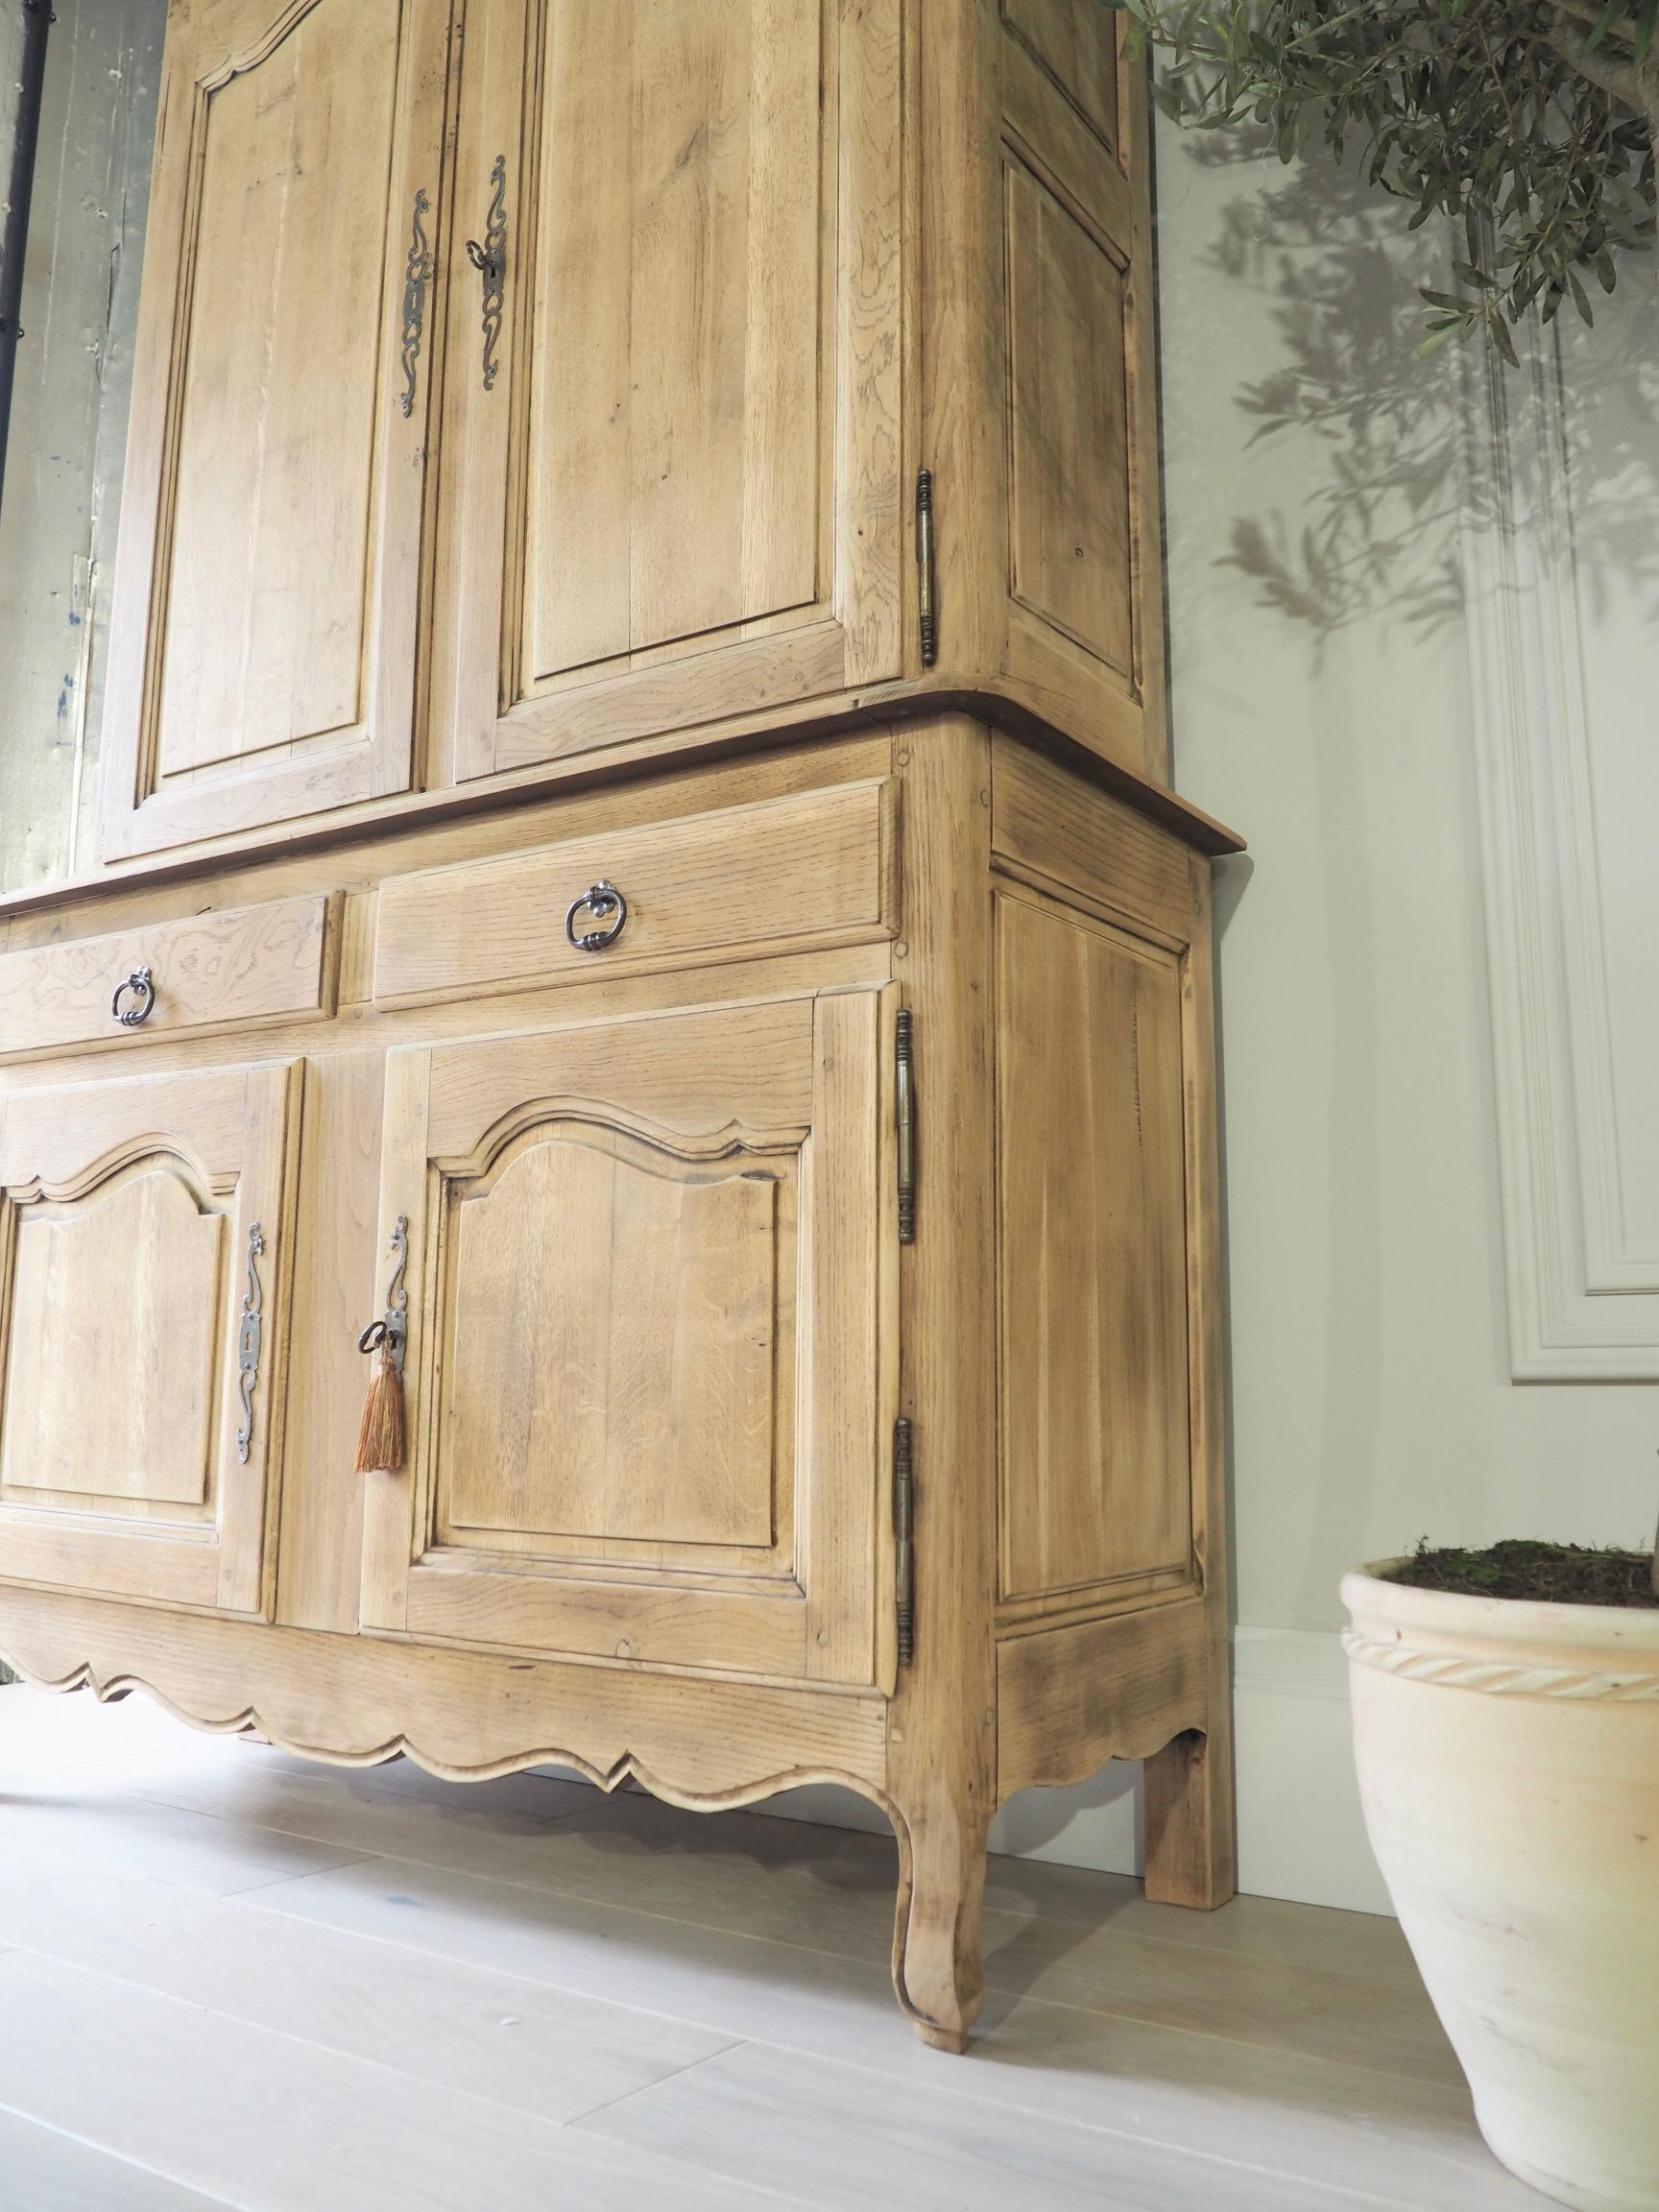 A stunning large antique oak larder cupboard/cabinet, comprising of an upper and lower cabinet.

The lower half opens onto a large shelf and the upper doors open onto shelves.

The cabinet has been thoroughly sanded to give a raw wood look and